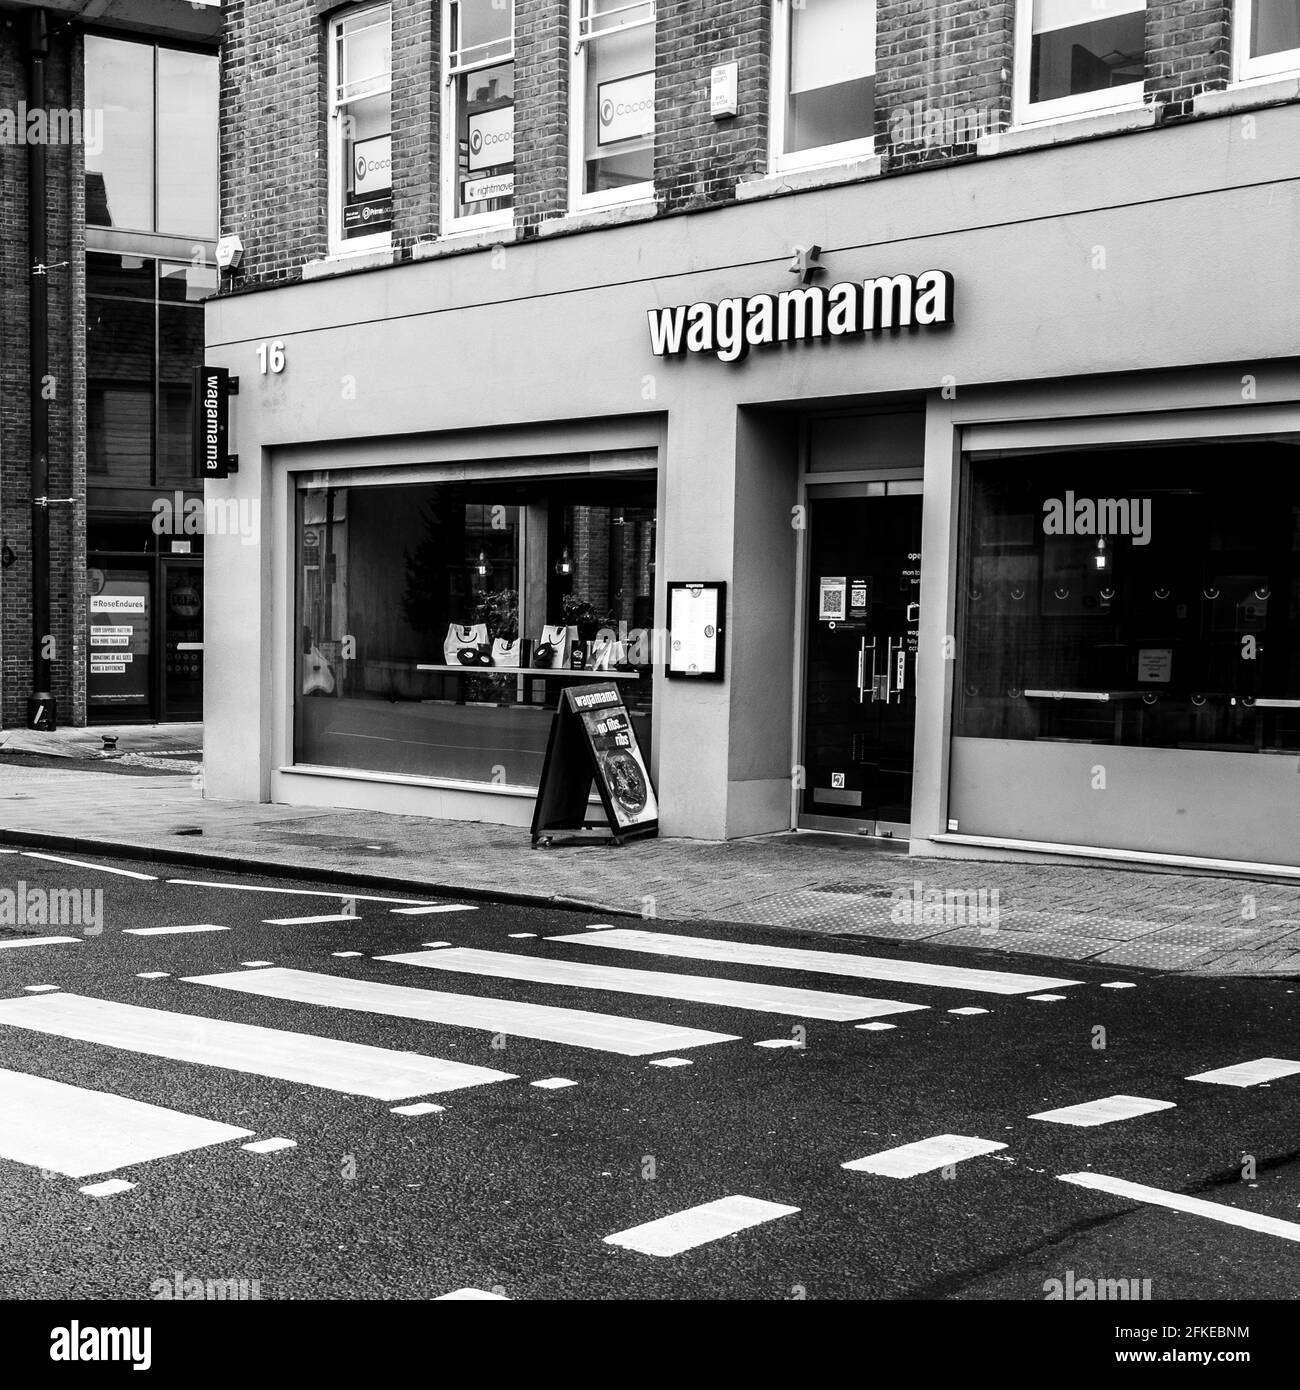 Kingston Upon Thames, London UK, Wagamama Asian Food Restaurant Shop Front With No People Stock Photo